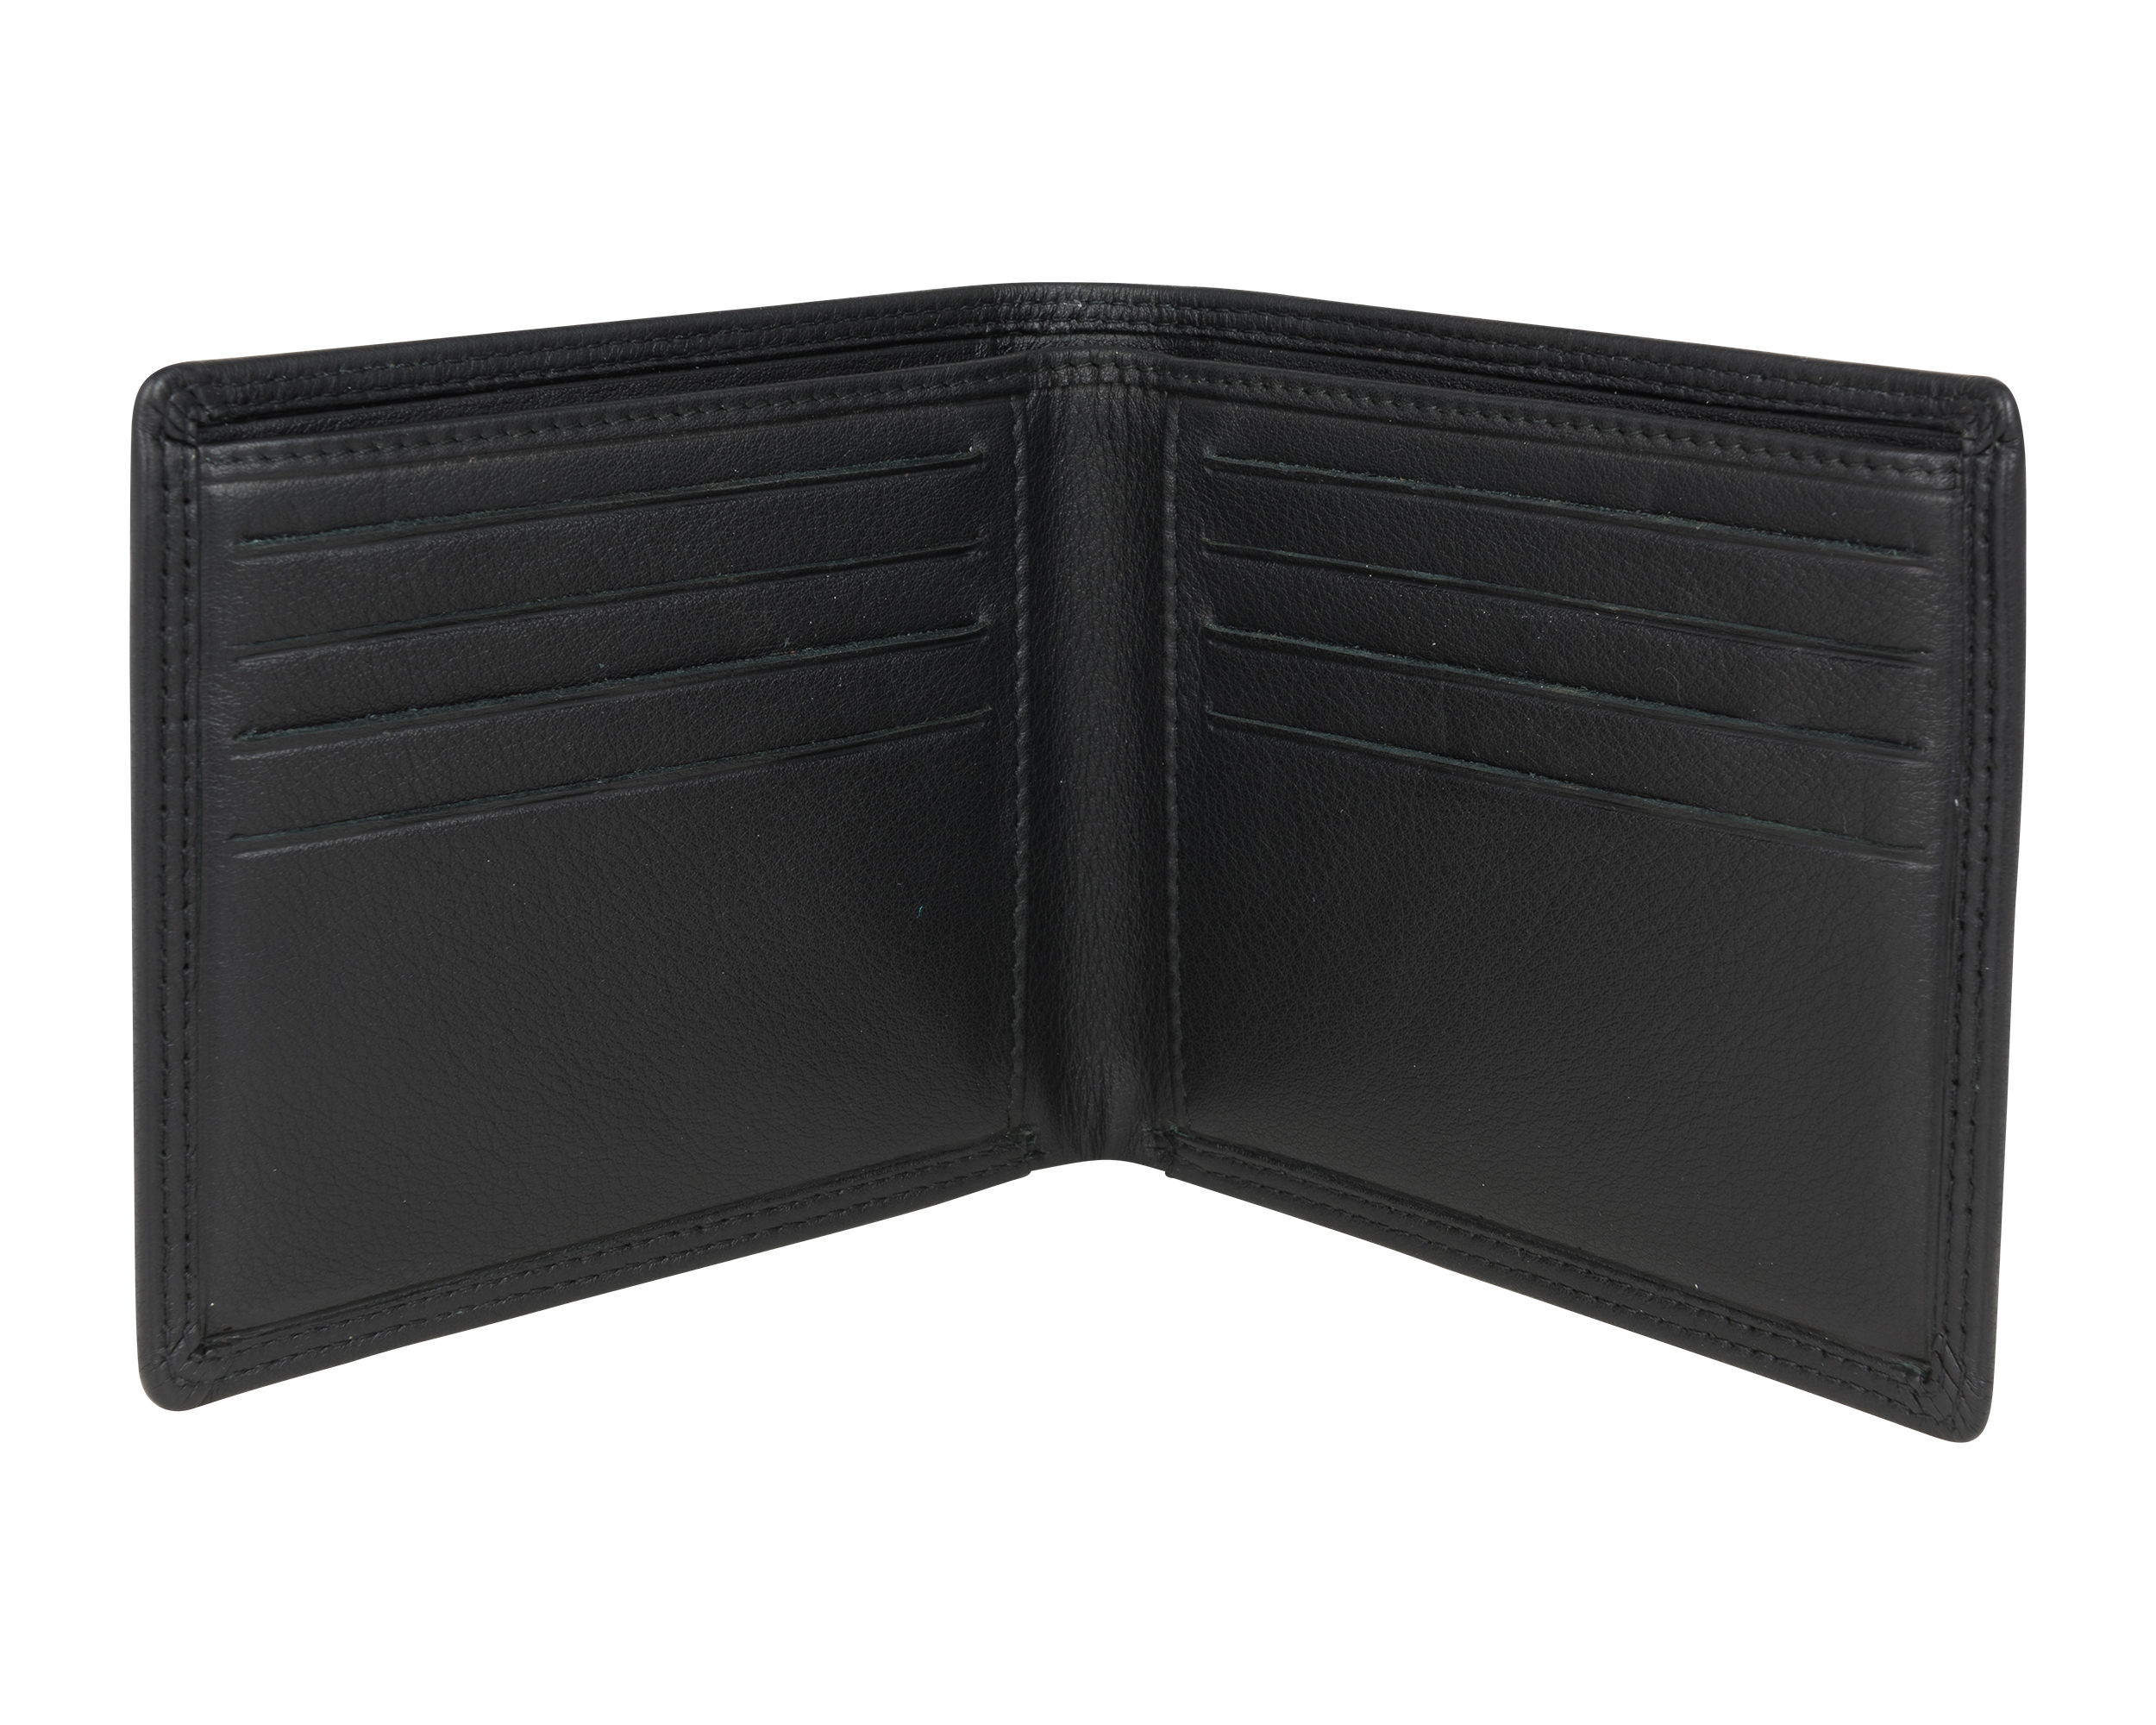 Black Leather Classic Billfold Wallet RFID lined 8 Card Slots - Dalaco